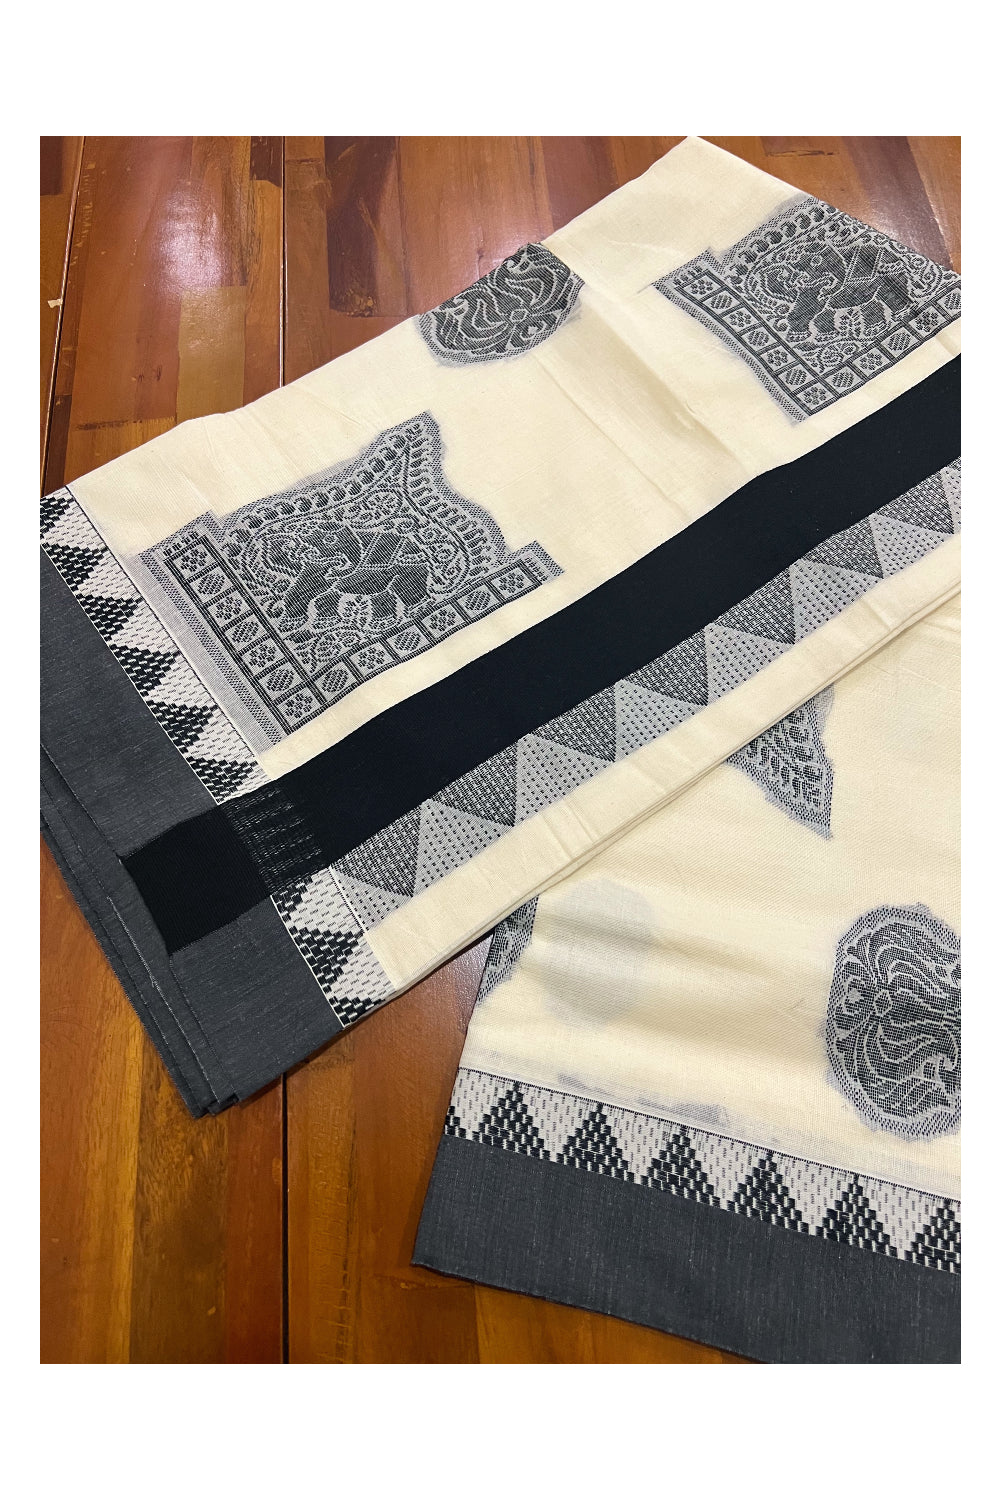 Kerala Saree with Black Elephant Embroidery Design and Temple Border